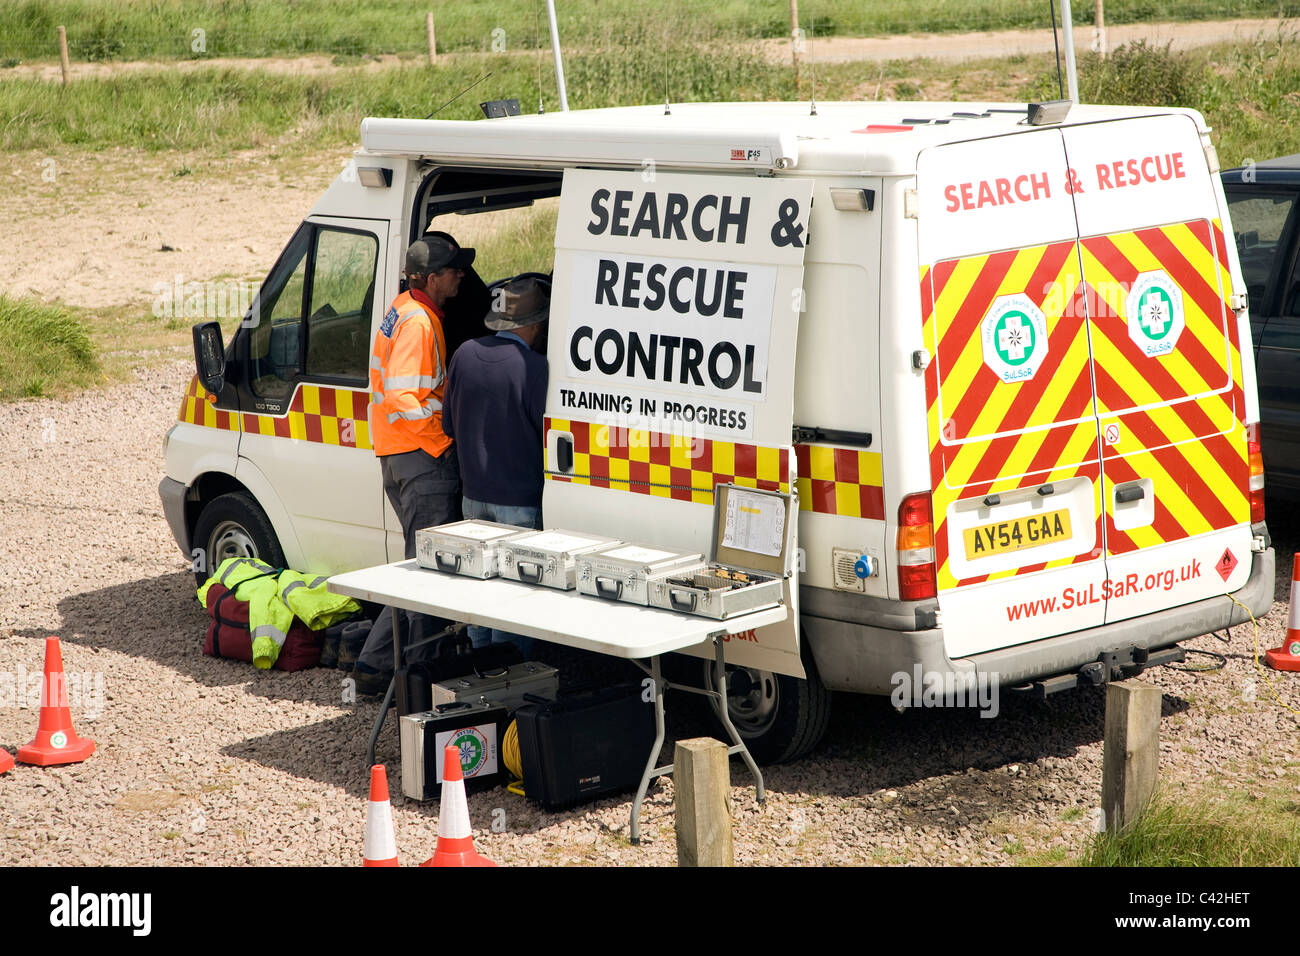 Search and rescue vehicle in training exercise, Bawdsey, Suffolk, England Stock Photo